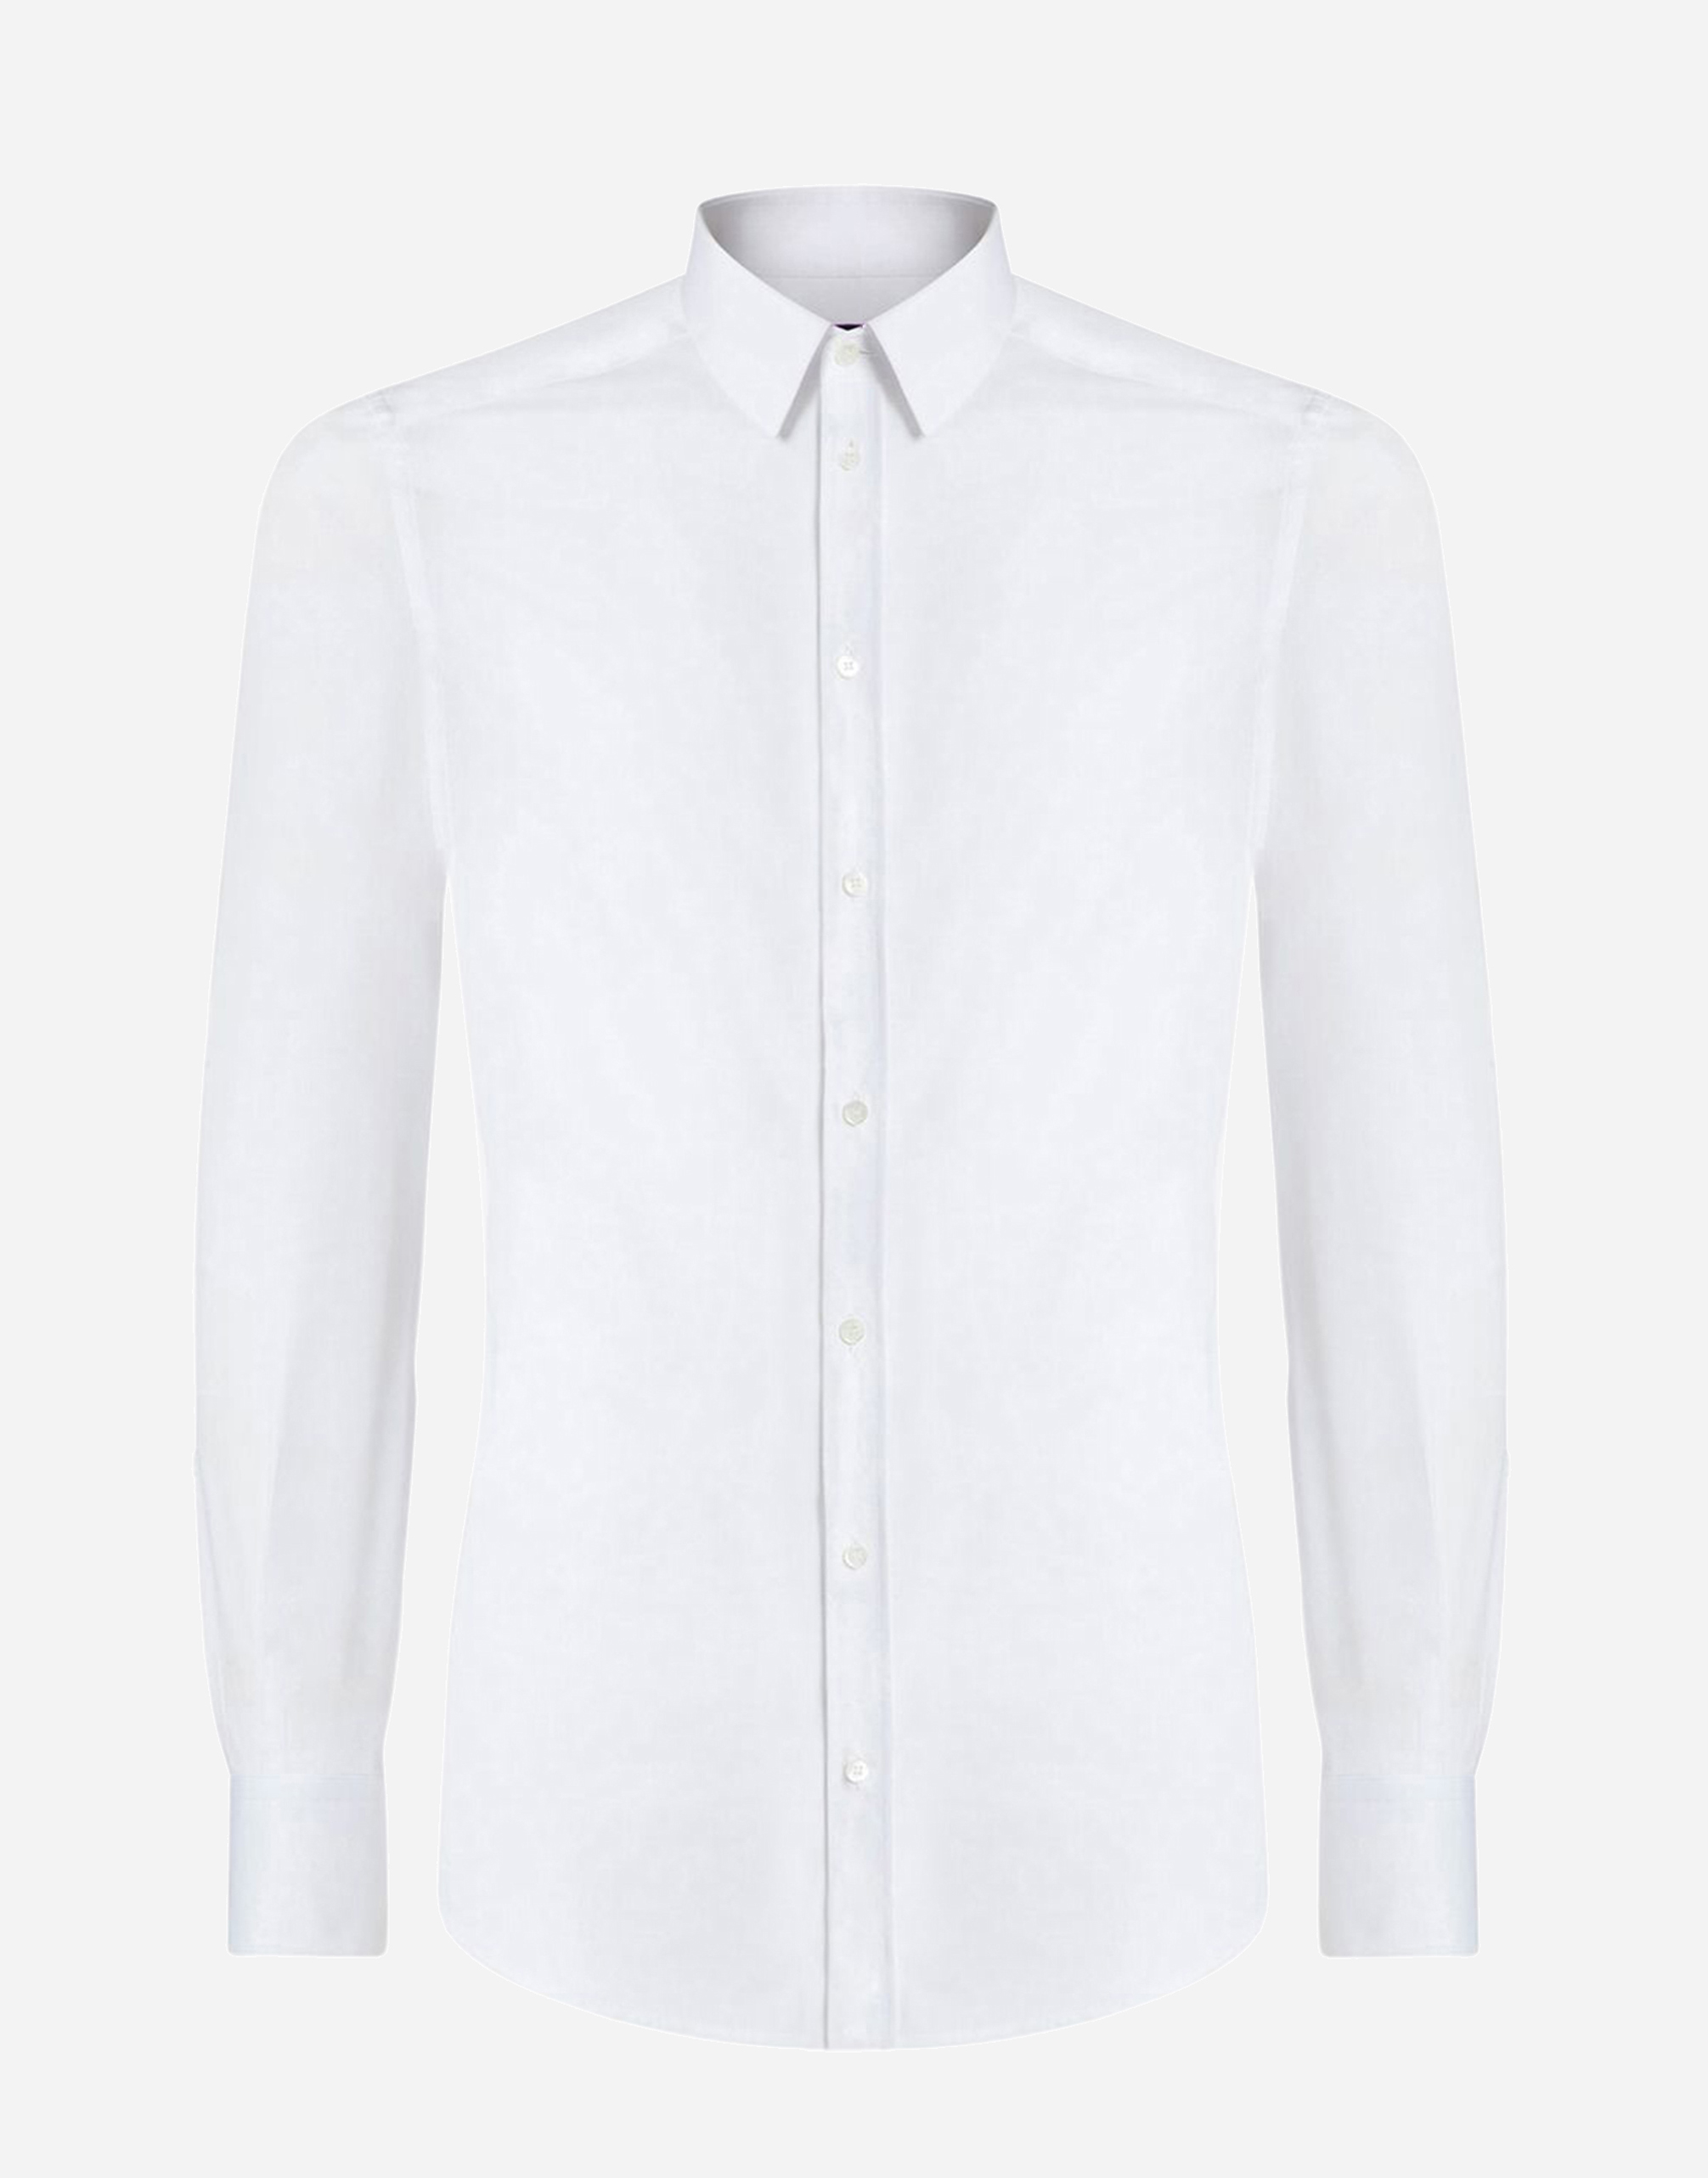 Gold fit shirt in cotton poplin in White